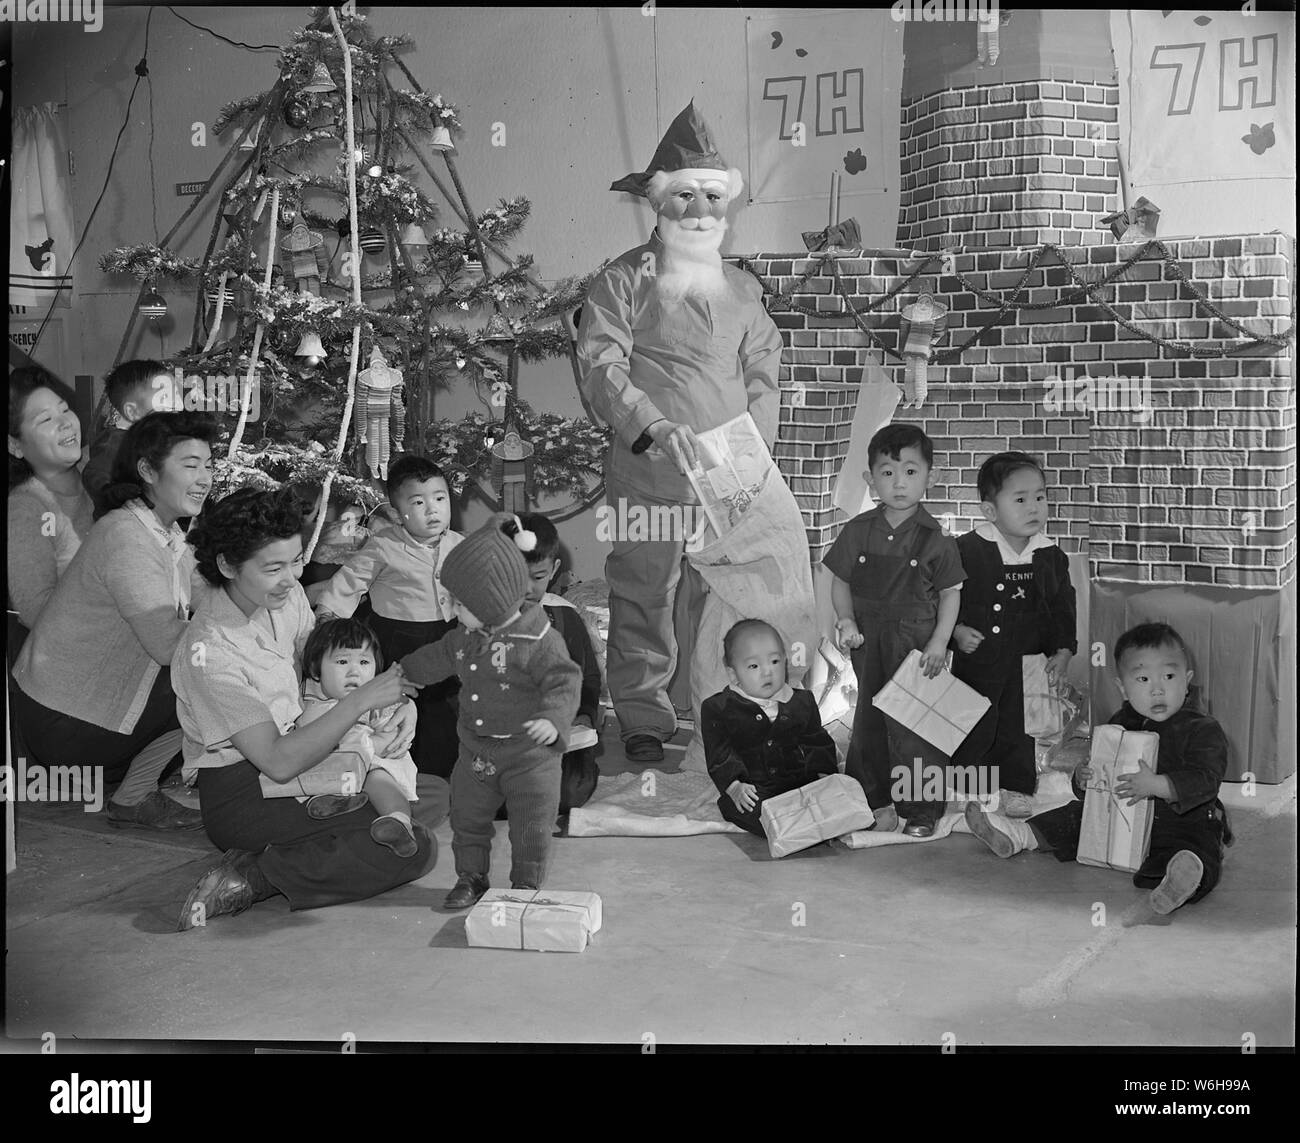 Granada Relocation Center, Amache, Colorado. Chief Steward Matsumoto of Block 7-H at the Granada Re . . .; Scope and content:  The full caption for this photograph reads: Granada Relocation Center, Amache, Colorado. Chief Steward Matsumoto of Block 7-H at the Granada Relocation Center dons some red pajamas and a Santa Claus mask to make Christmas real for the children whose barracks room homes have no Christmas trees. they are the children of persons of Japanese ancestry evacuated from the west coast. The gifts, provided by churches throughout the United States for the children of the ten relo Stock Photo